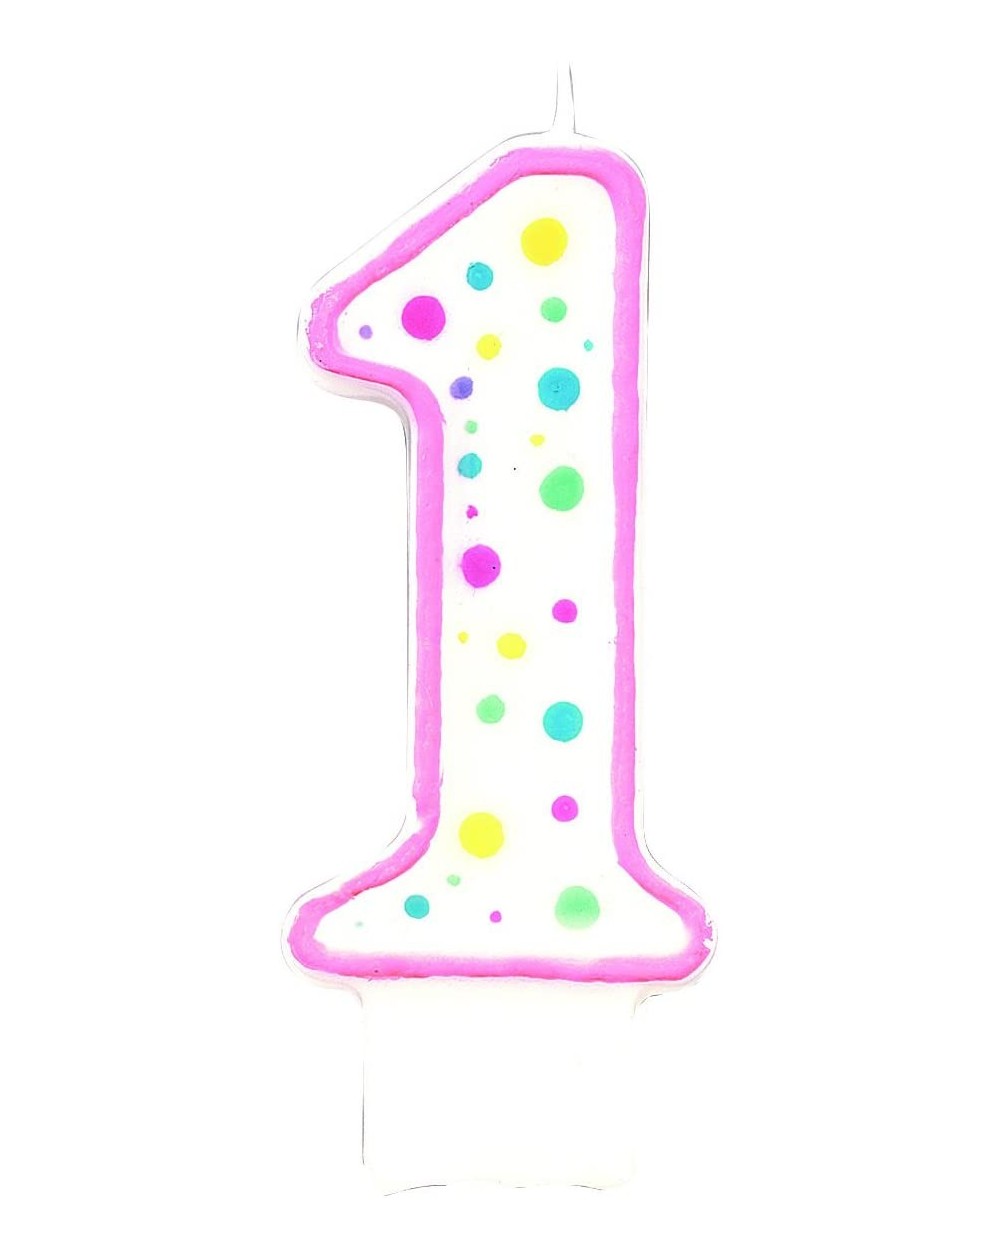 Cake Decorating Supplies Polka Dot Numeral Candle- 3-Inch by 1.5-Inch- No. 1 Pink- 1-Pack - C51151VCNKF $8.05